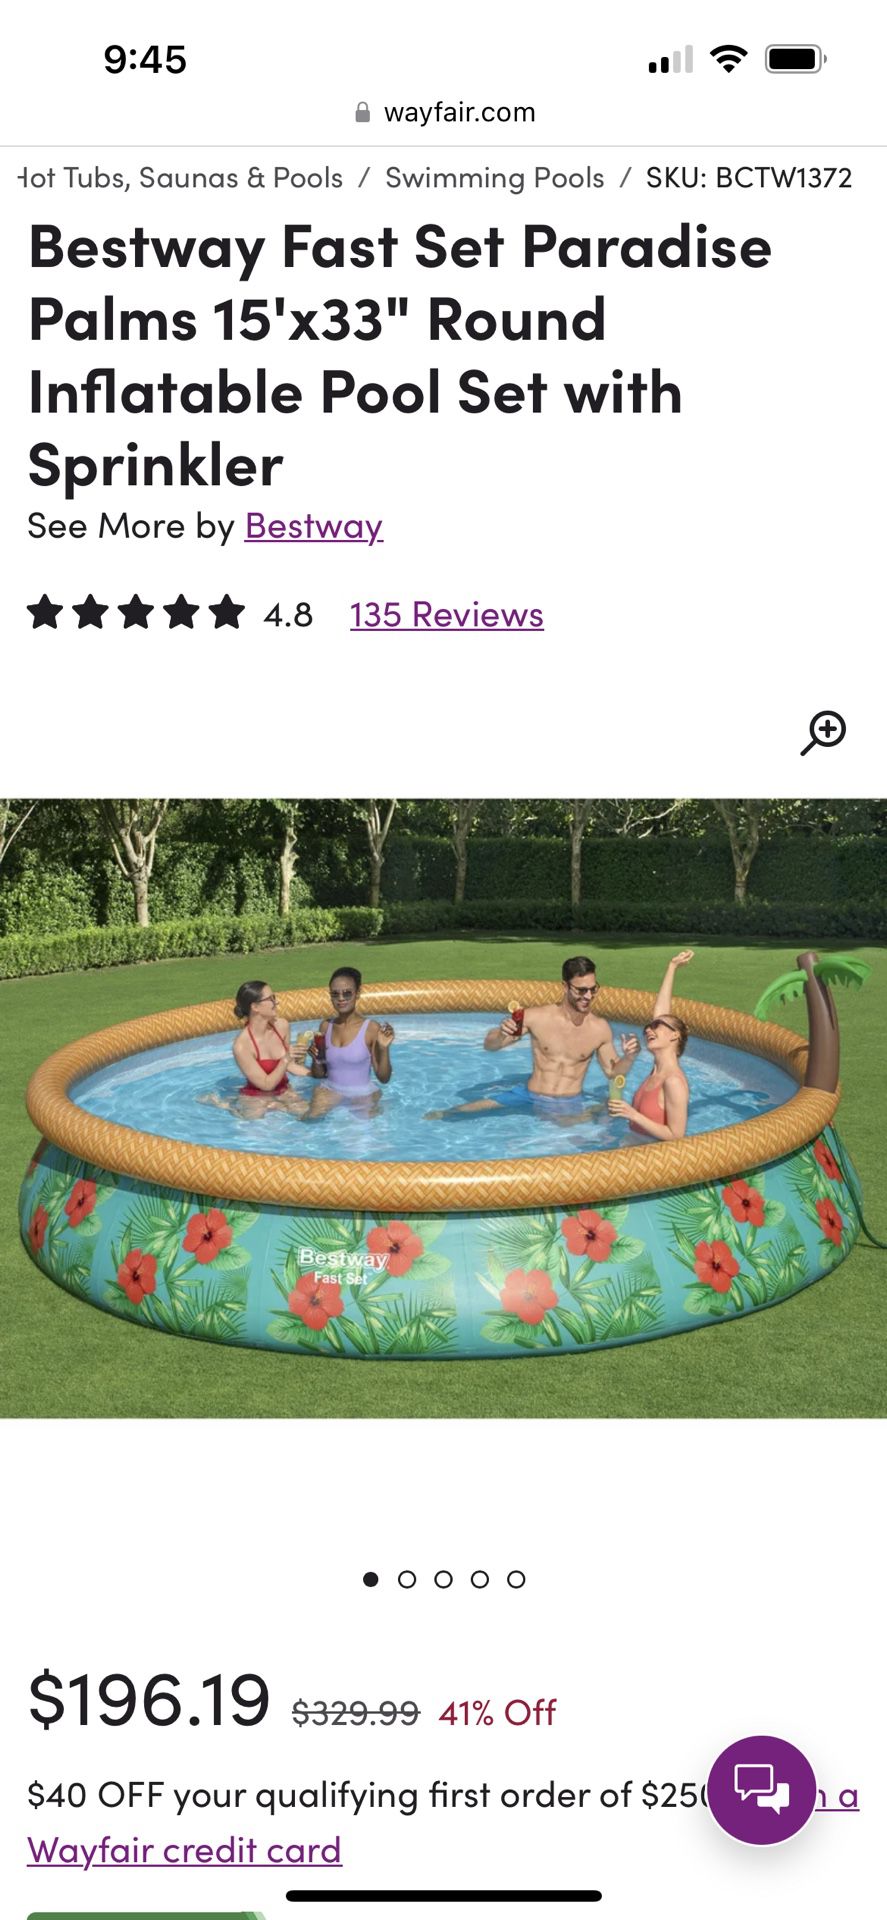 Accessories Pool Fast - Palms Set With for Sale OfferUp Menifee, CA Paradise in Inflatable Best way